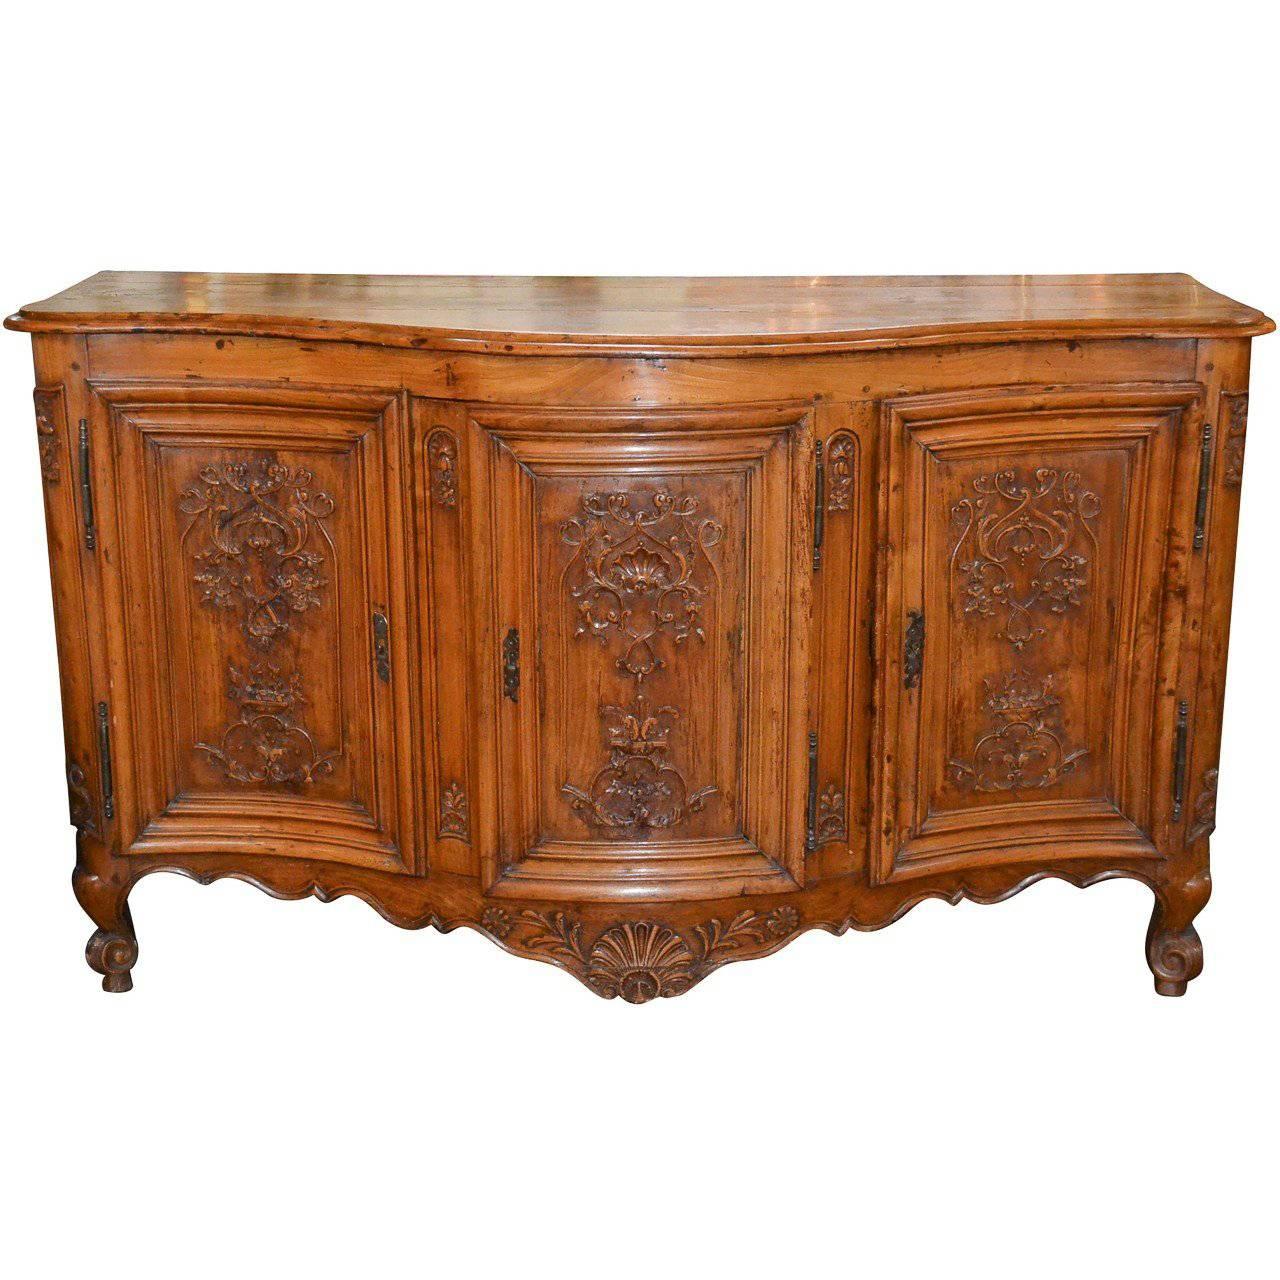 18th Century French Buffet from Provence